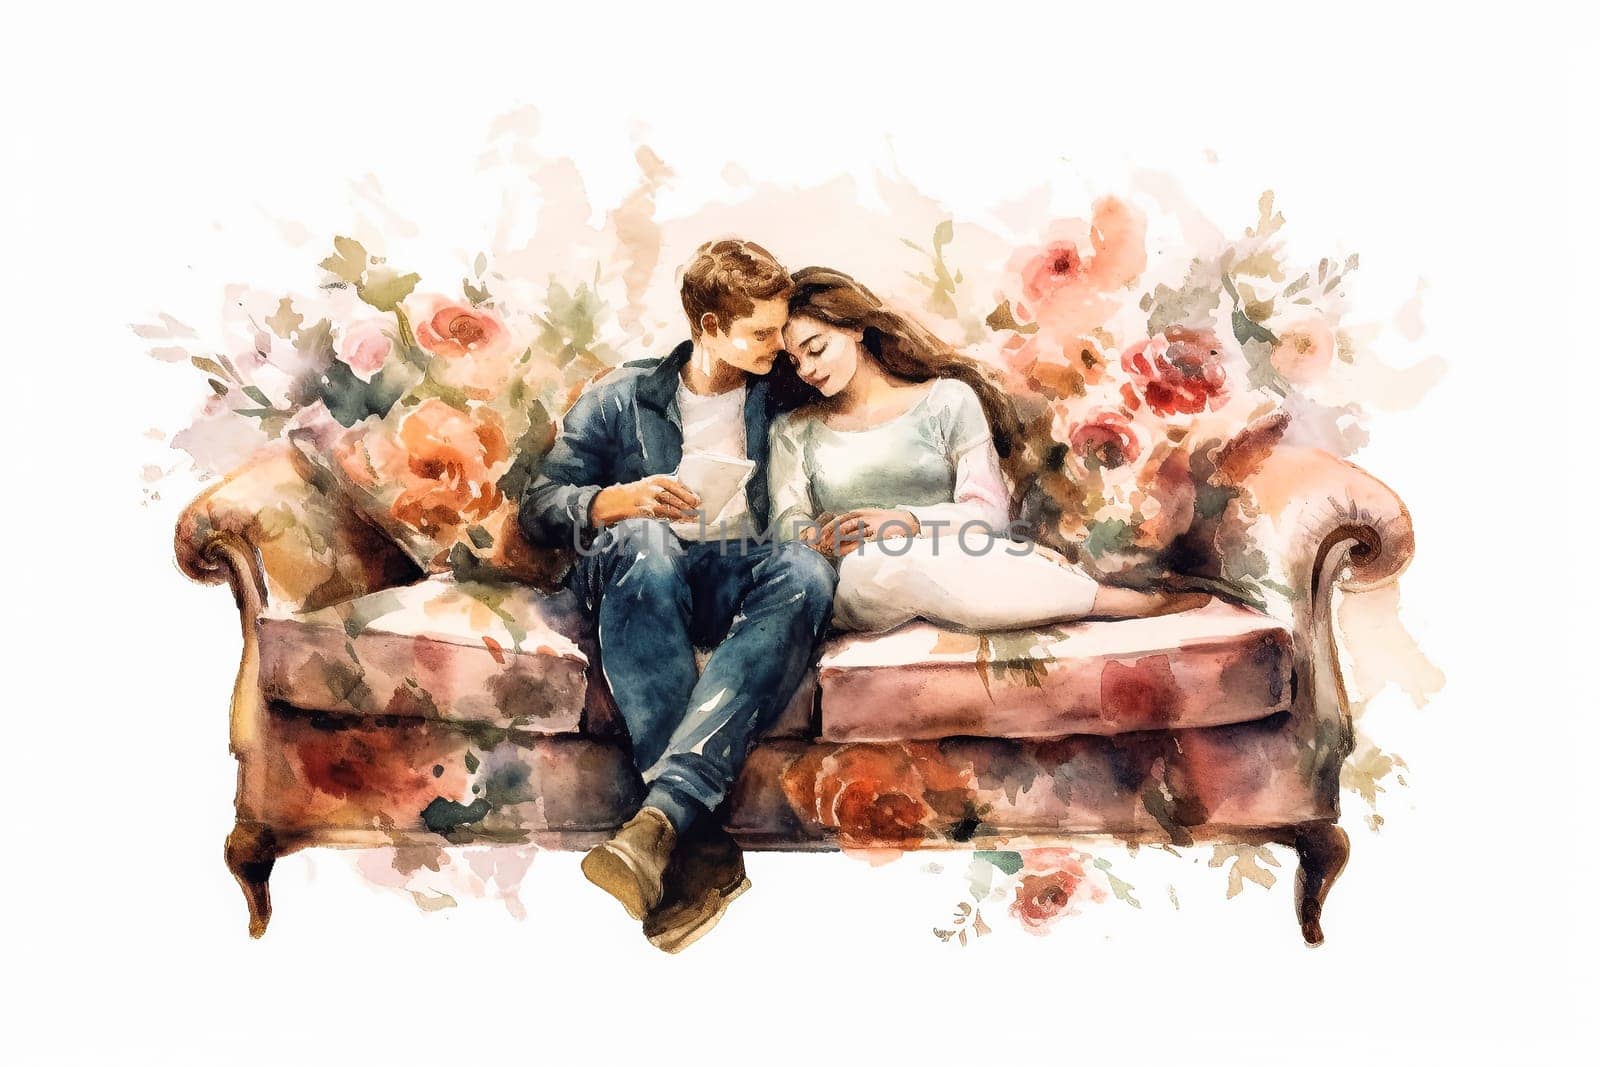 a watercolor illustration of a couple in a tender hug on the sofa. by Alla_Morozova93